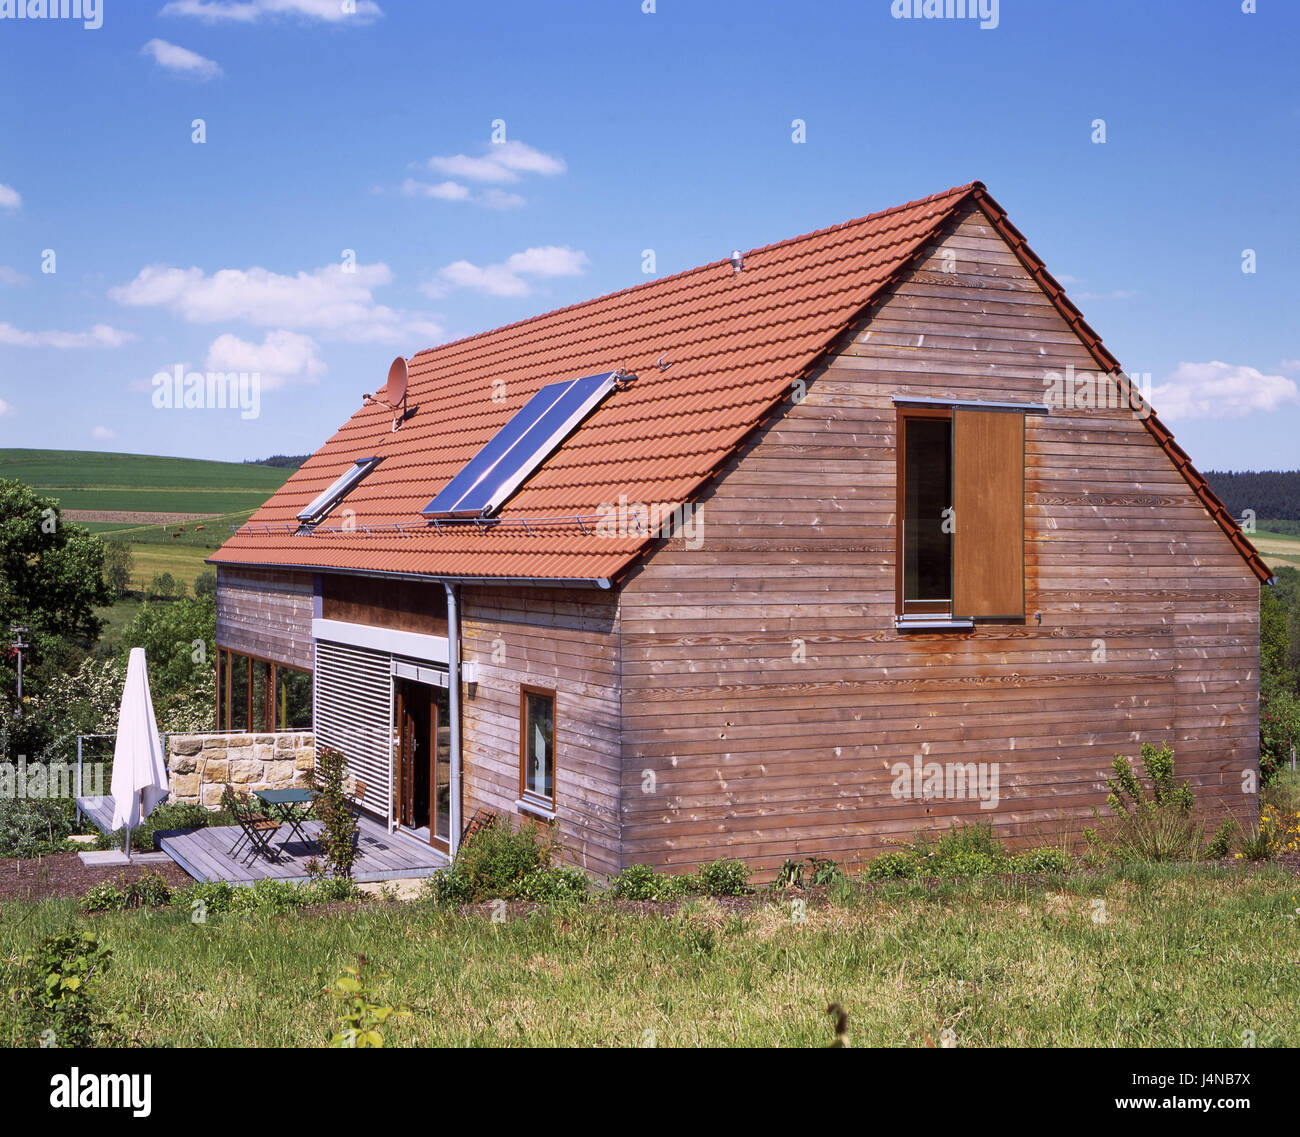 Hill scenery, single-family dwelling, scenery, house, residential house, summer cottage, wooden house, wooden facade, rurally, garden, terrace, roof, house roof, gable roof, solar attachment, architecture, living, creation, own home, real estate, design, hillside situation, environment, seclusion, rest, Idyll, Stock Photo